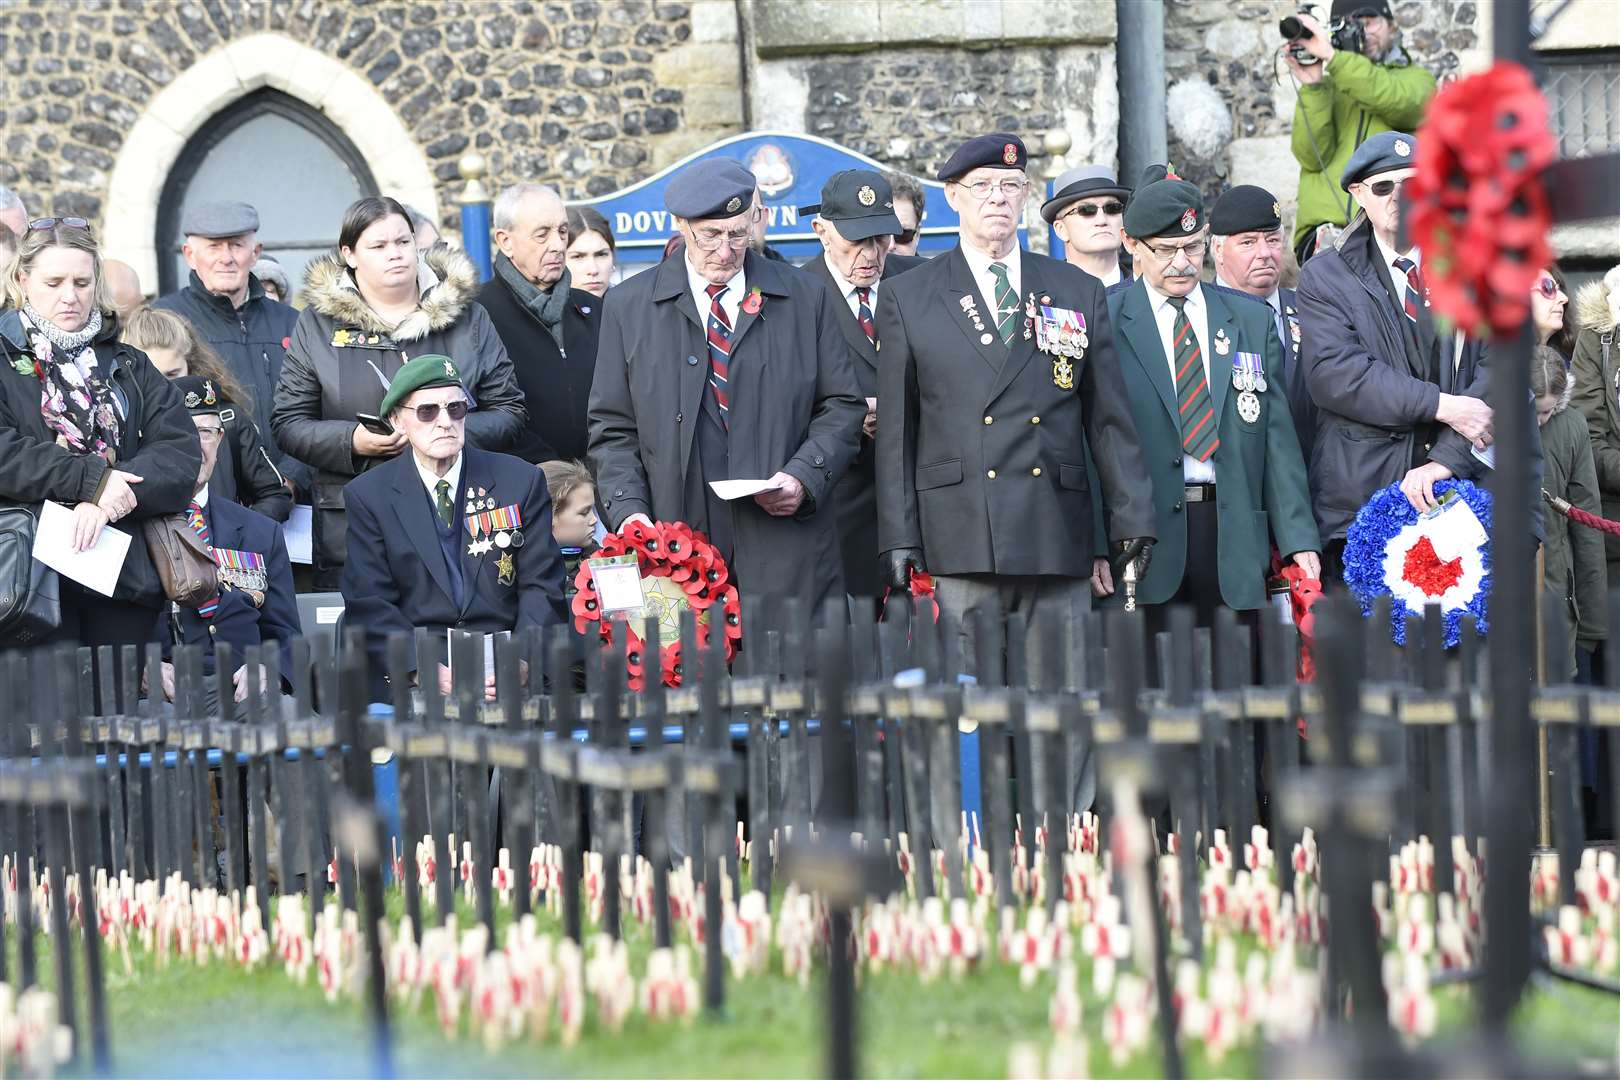 Last year's Remembrance Sunday service at Dover